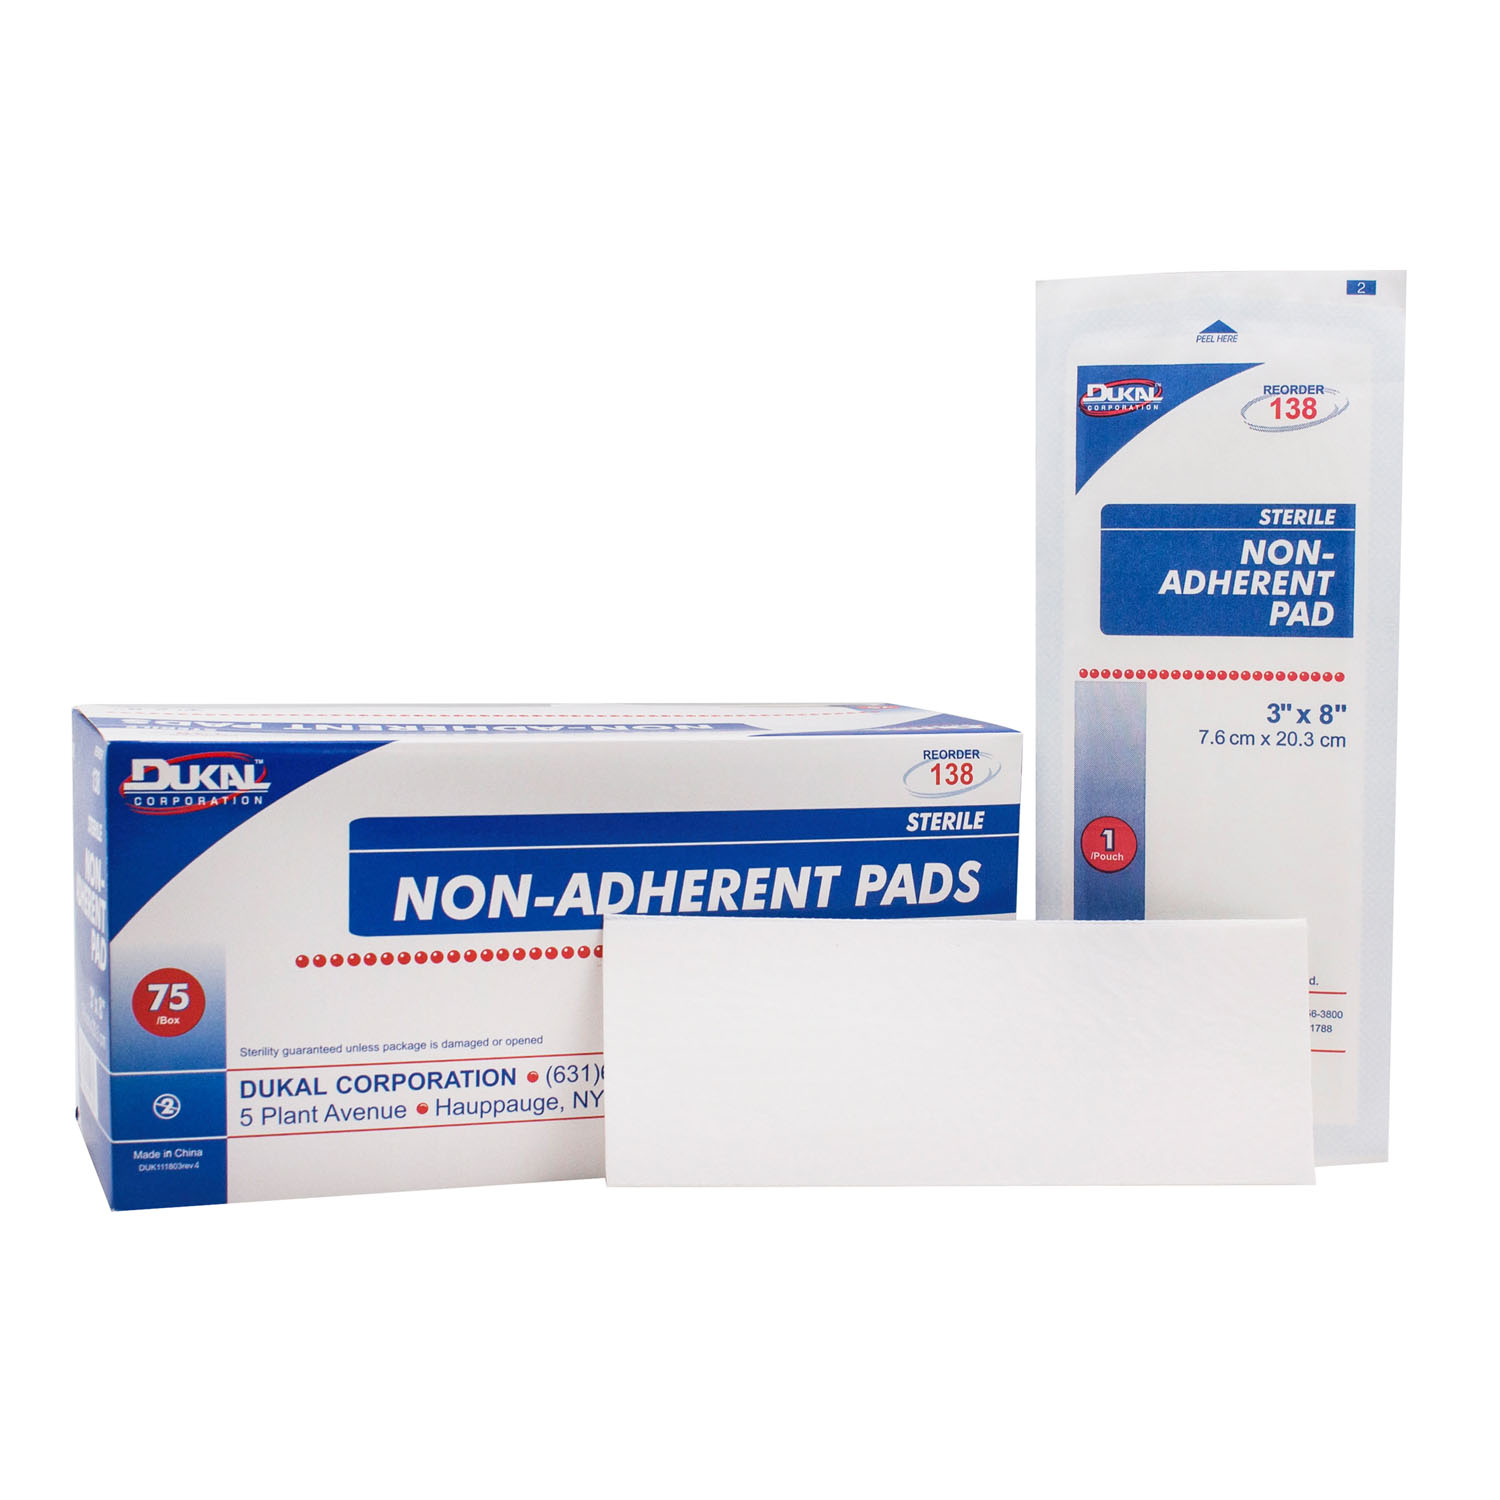 DUKAL NON-ADHERENT PADS : 138 BX $22.86 Stocked